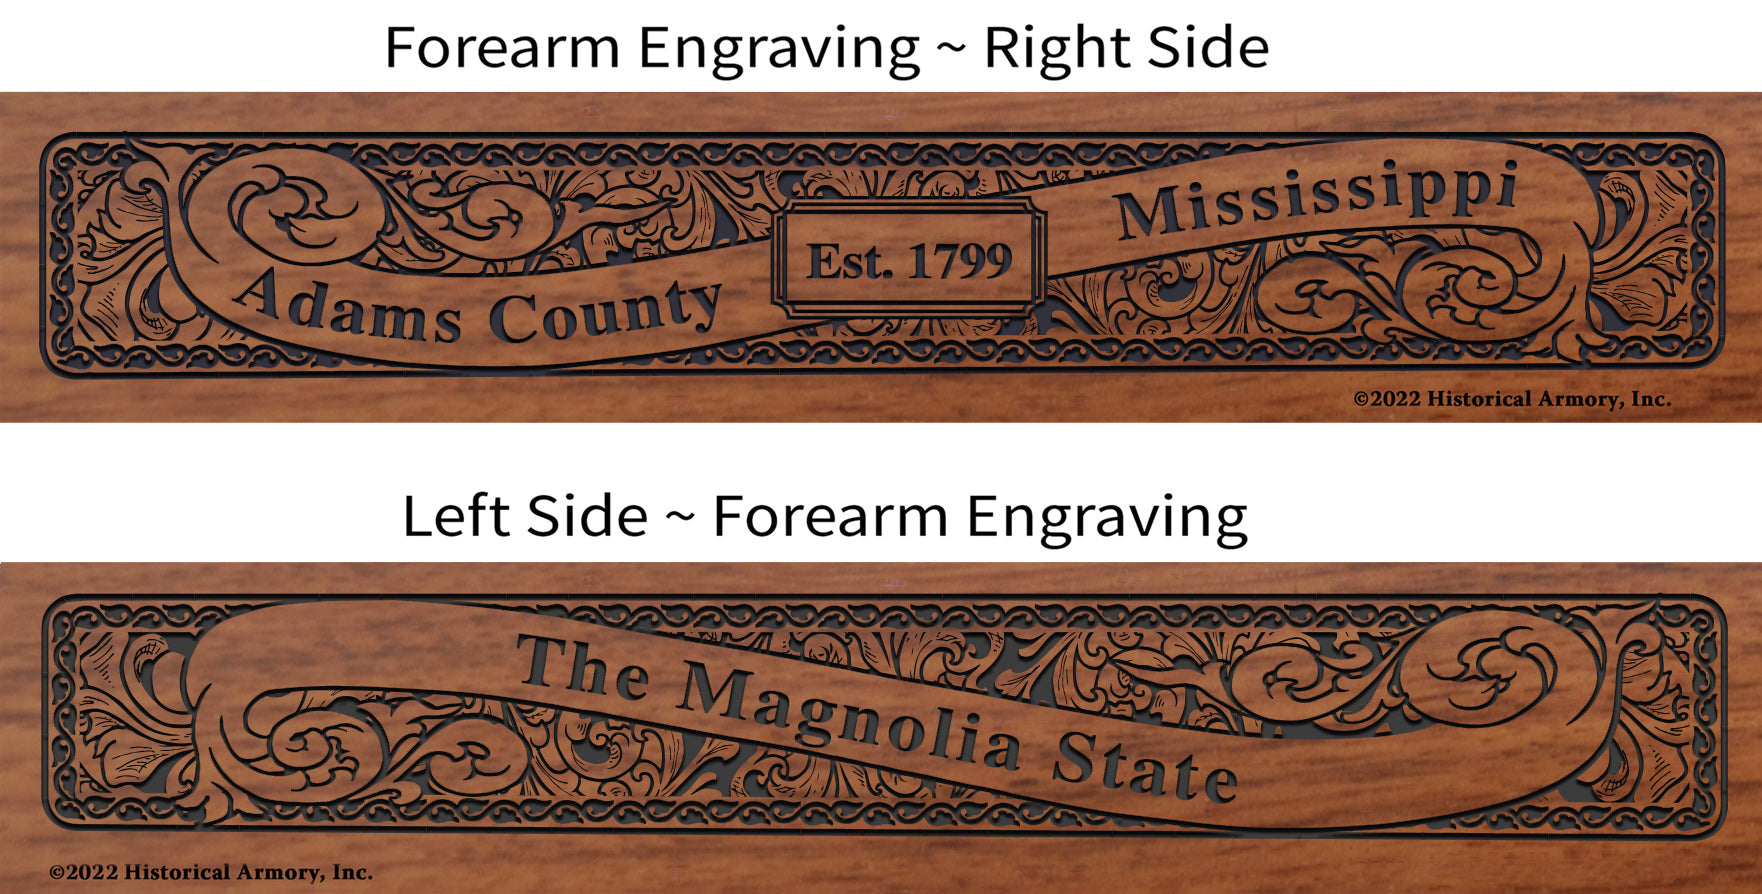 Adams County Mississippi Engraved Rifle Forearm